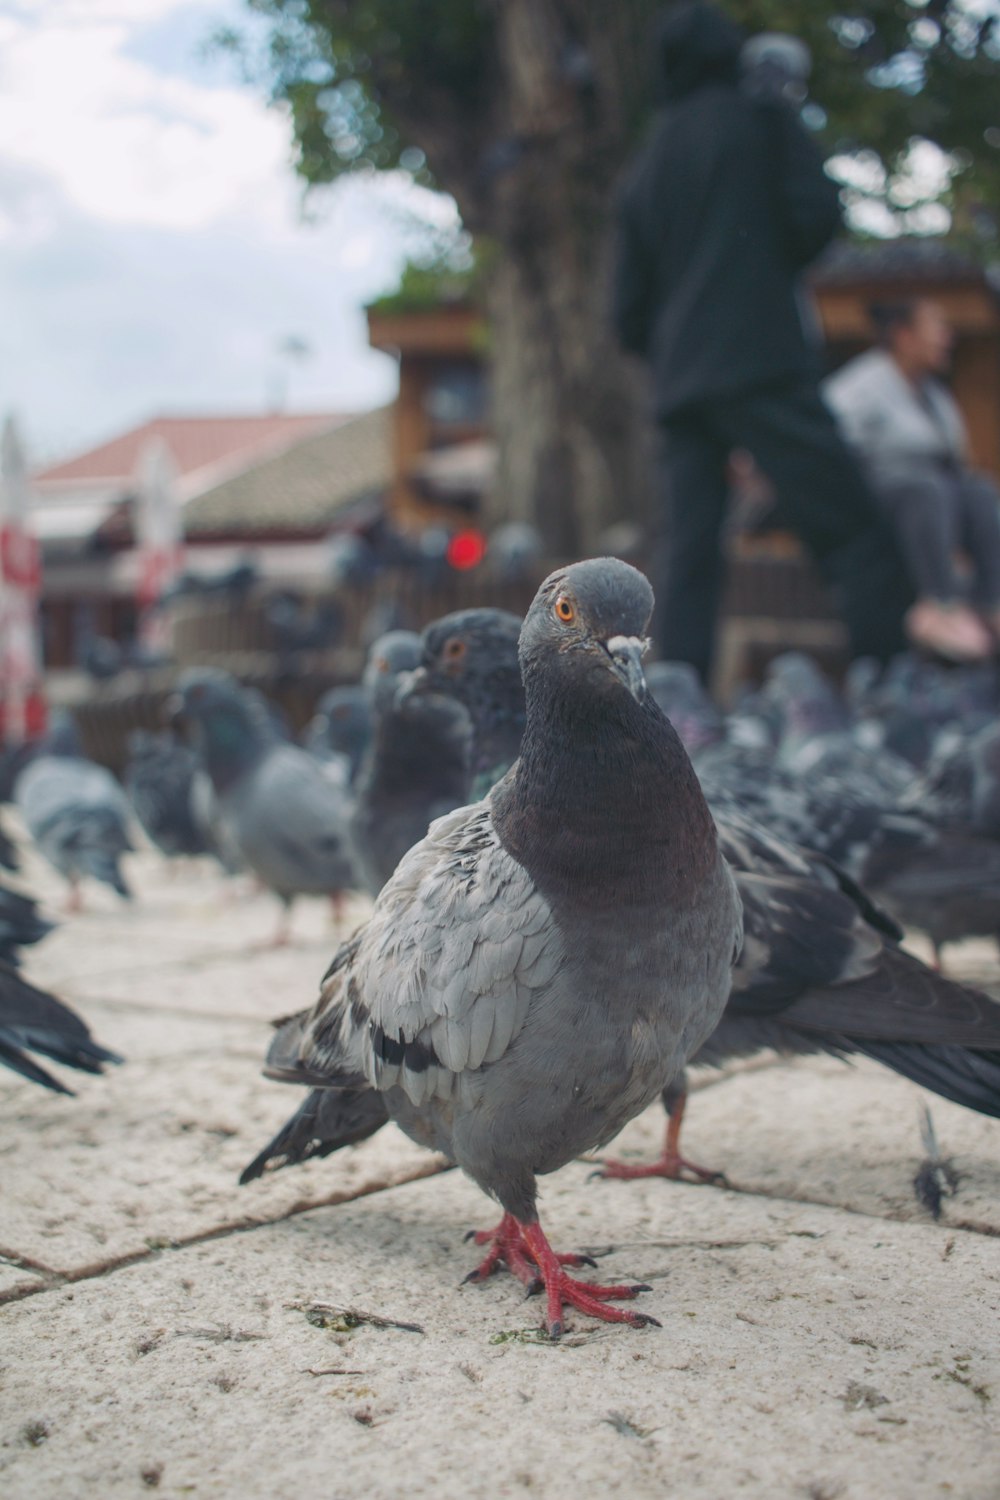 a flock of pigeons standing on a sidewalk